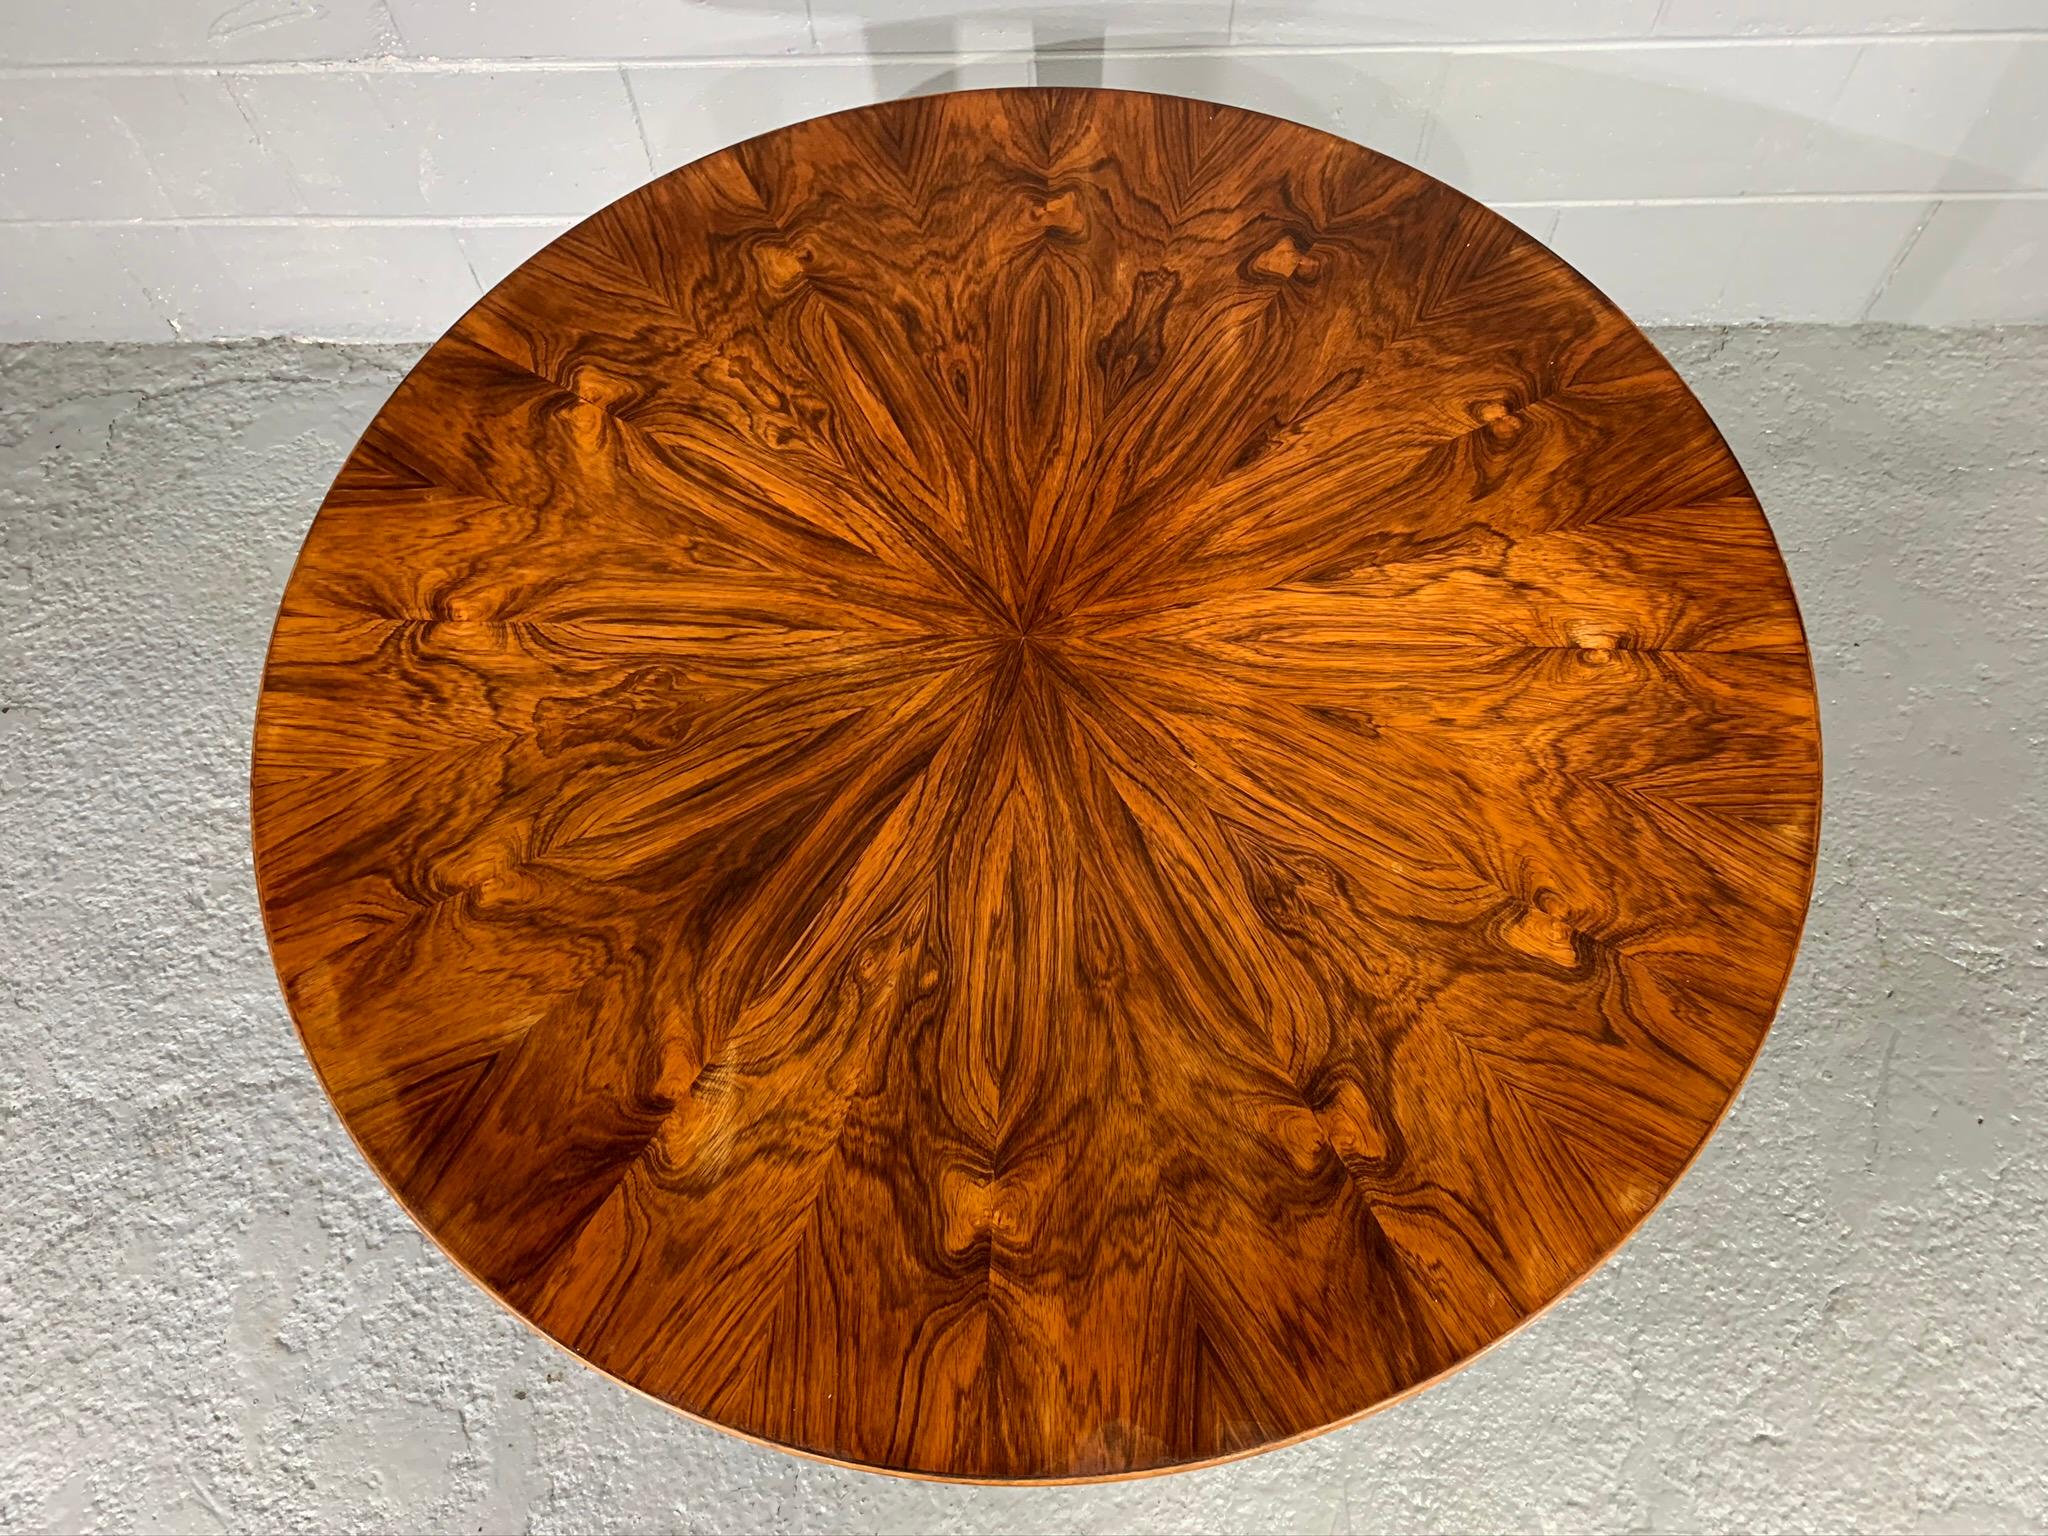 Extraordinary dramatic figured grain rosewood round coffee table by Edvard Valentinsen. This Danish modern table is stamped with Edv. Valentinsen makers mark underneath piece. Excellent vintage condition. Top has been previously re-oiled.